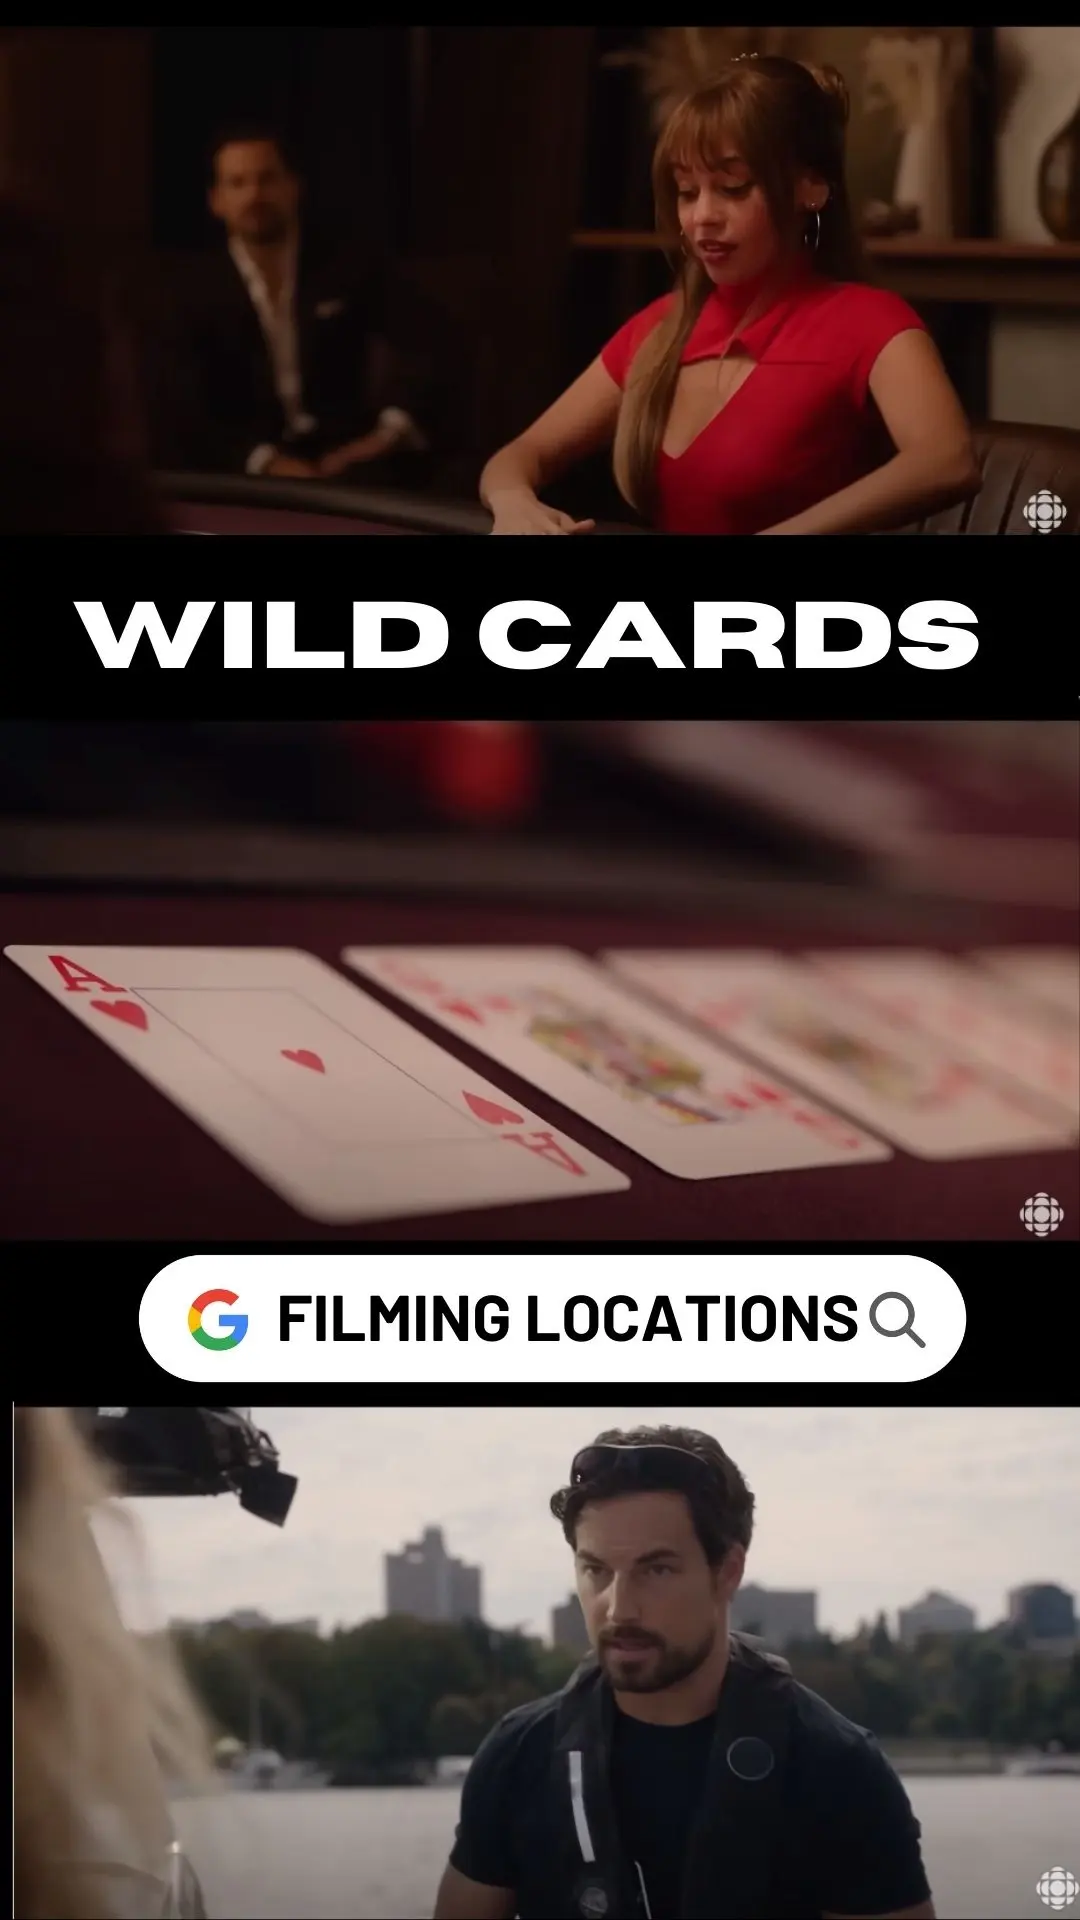 Wild Cards TV Series Filming Locations